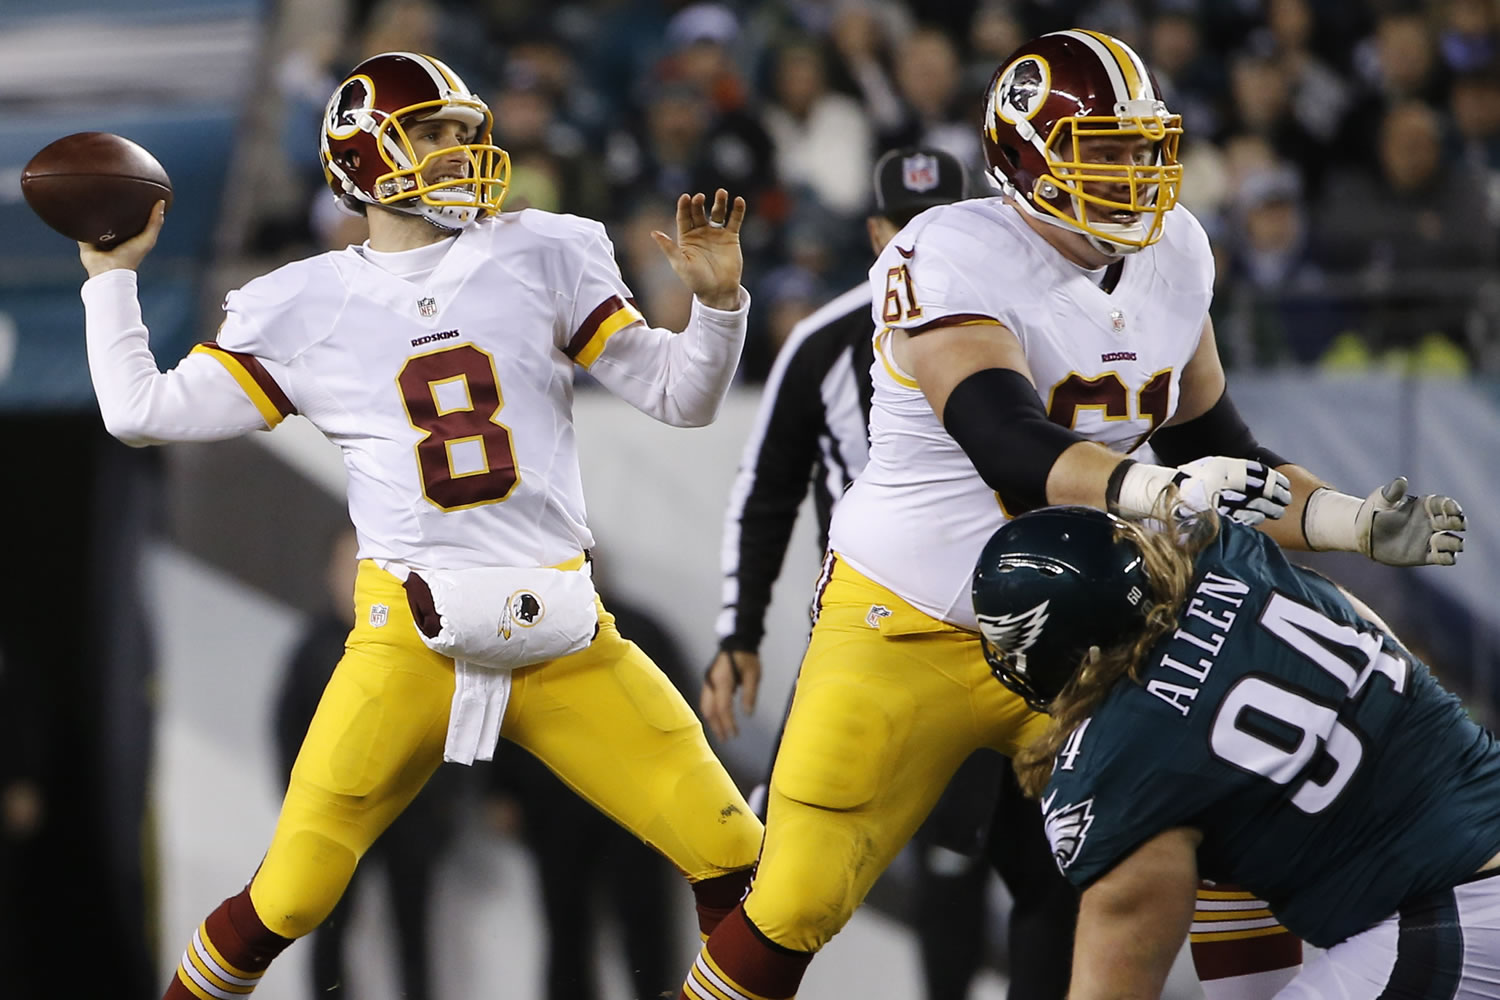 Washington Redskins' Kirk Cousins looks to pass in the first half of an NFL football game against the Philadelphia Eagles, Saturday, Dec. 26, 2015, in Philadelphia.